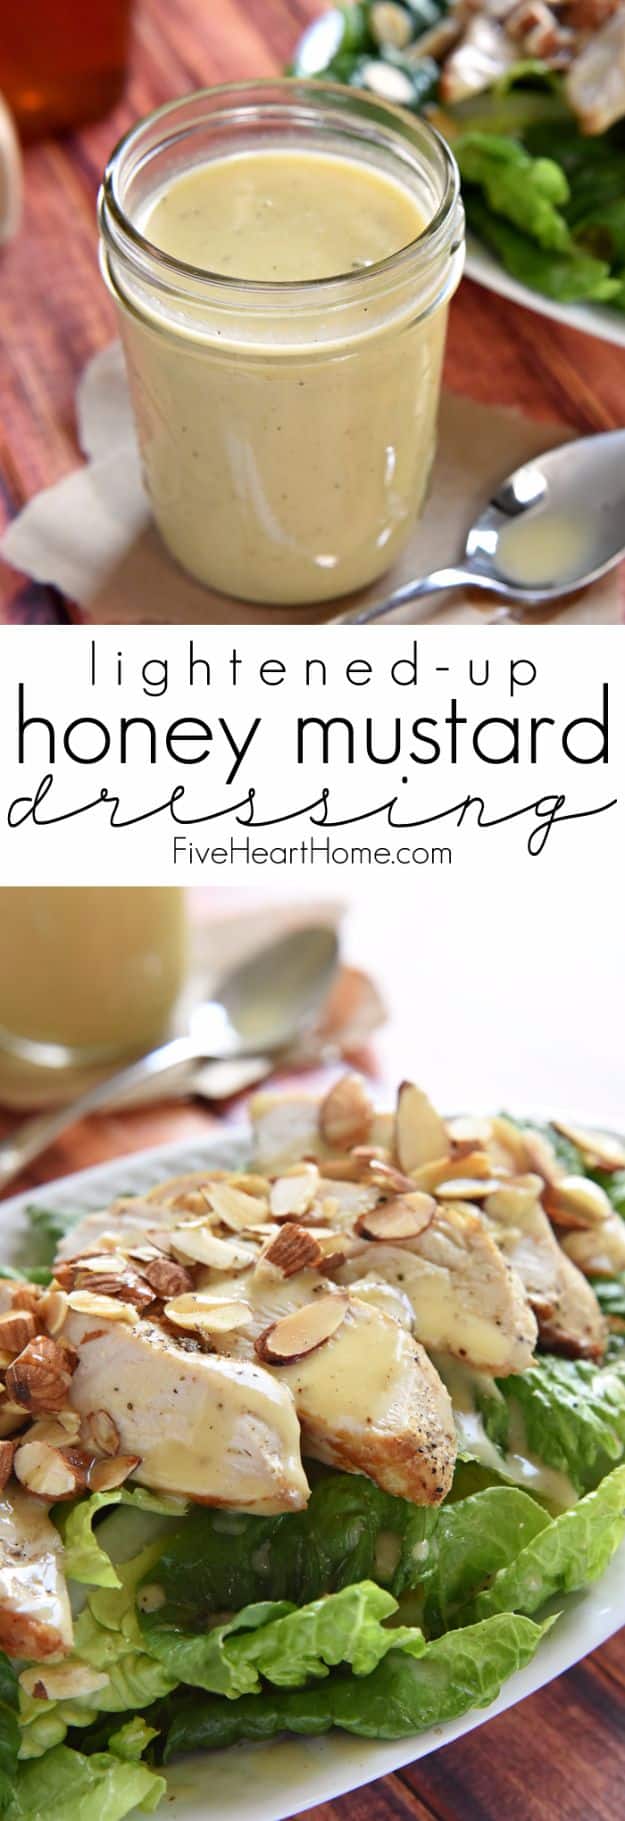 Salad Dressing Recipes - Lightened-Up Honey Mustard Dressing - Healthy, Low Calorie and Easy Recipes for Creamy Homeade Dressings - How To Make Vinaigrette, Mango, Greek, Paleo, Balsamic, Ranch, and Italian Copycat Dressings 